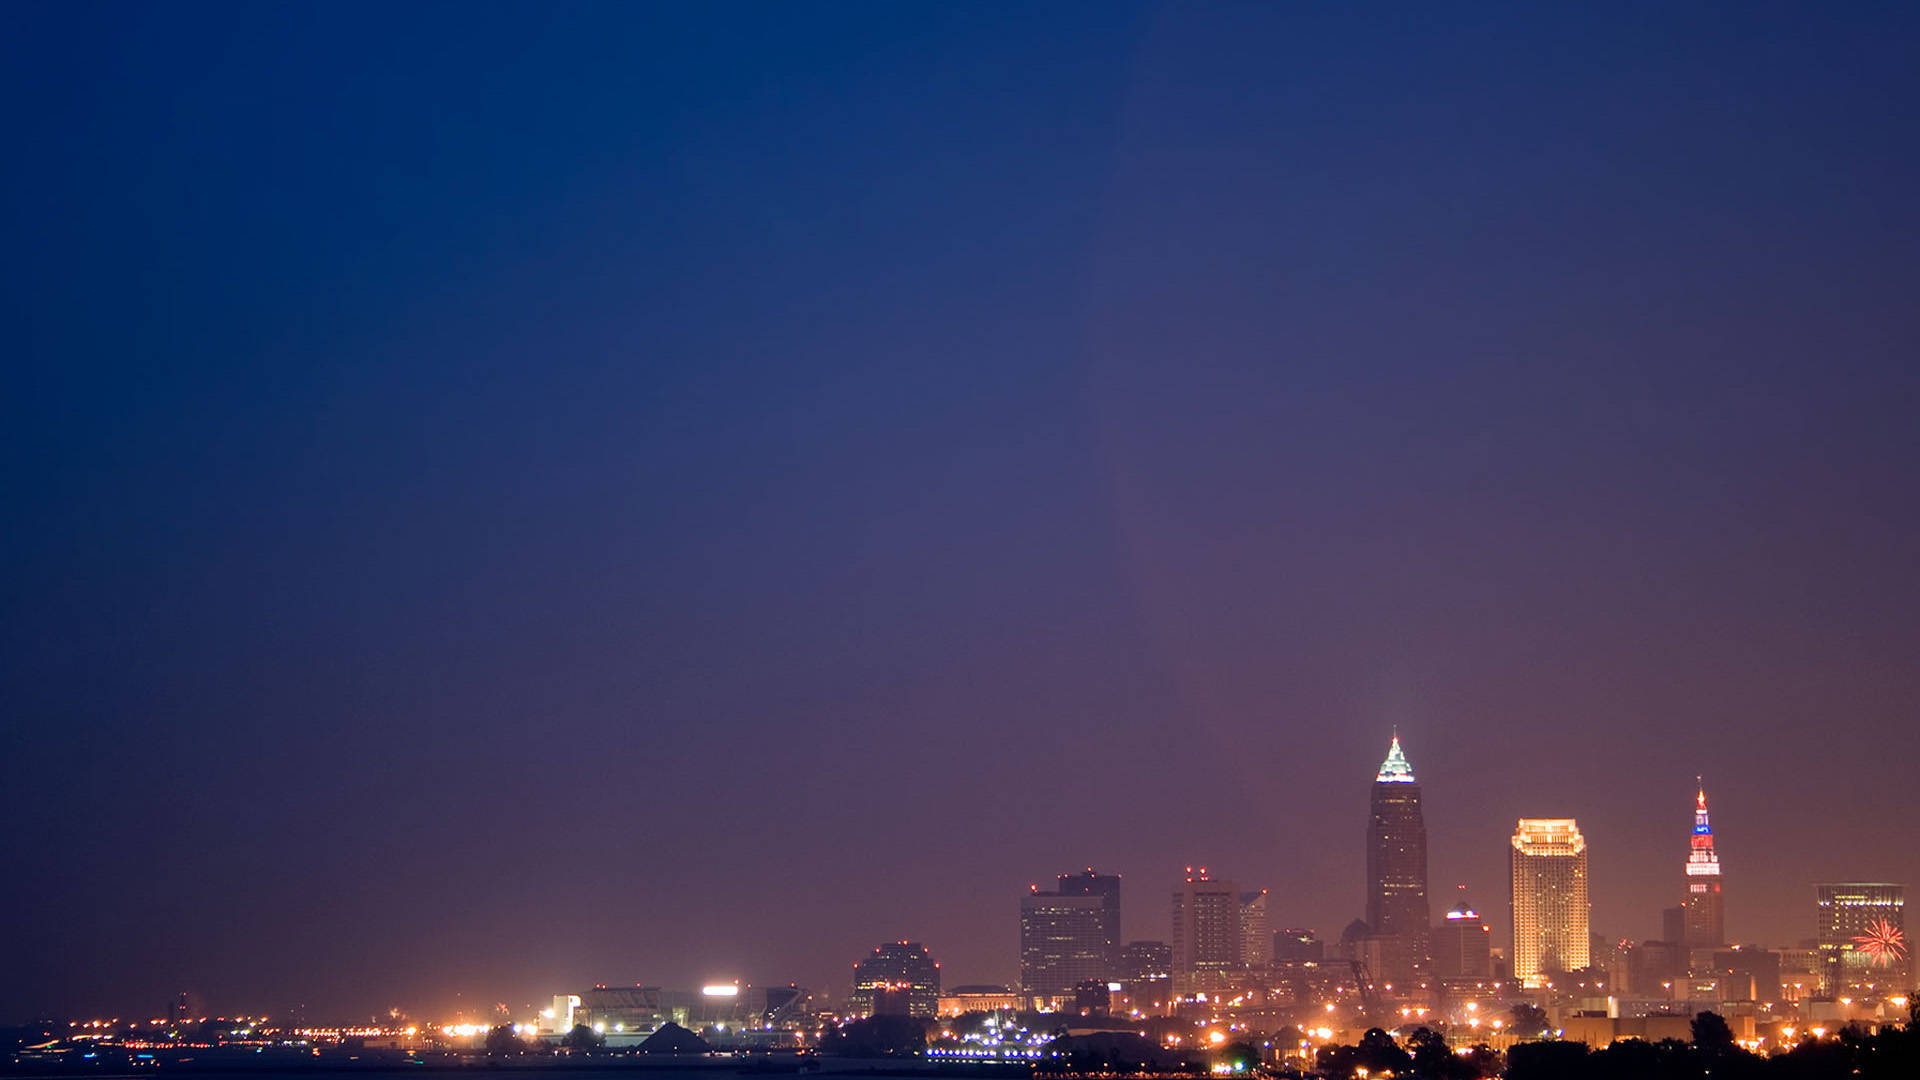 Edgewater Park At Night In Cleveland Ohio City Wallpaper